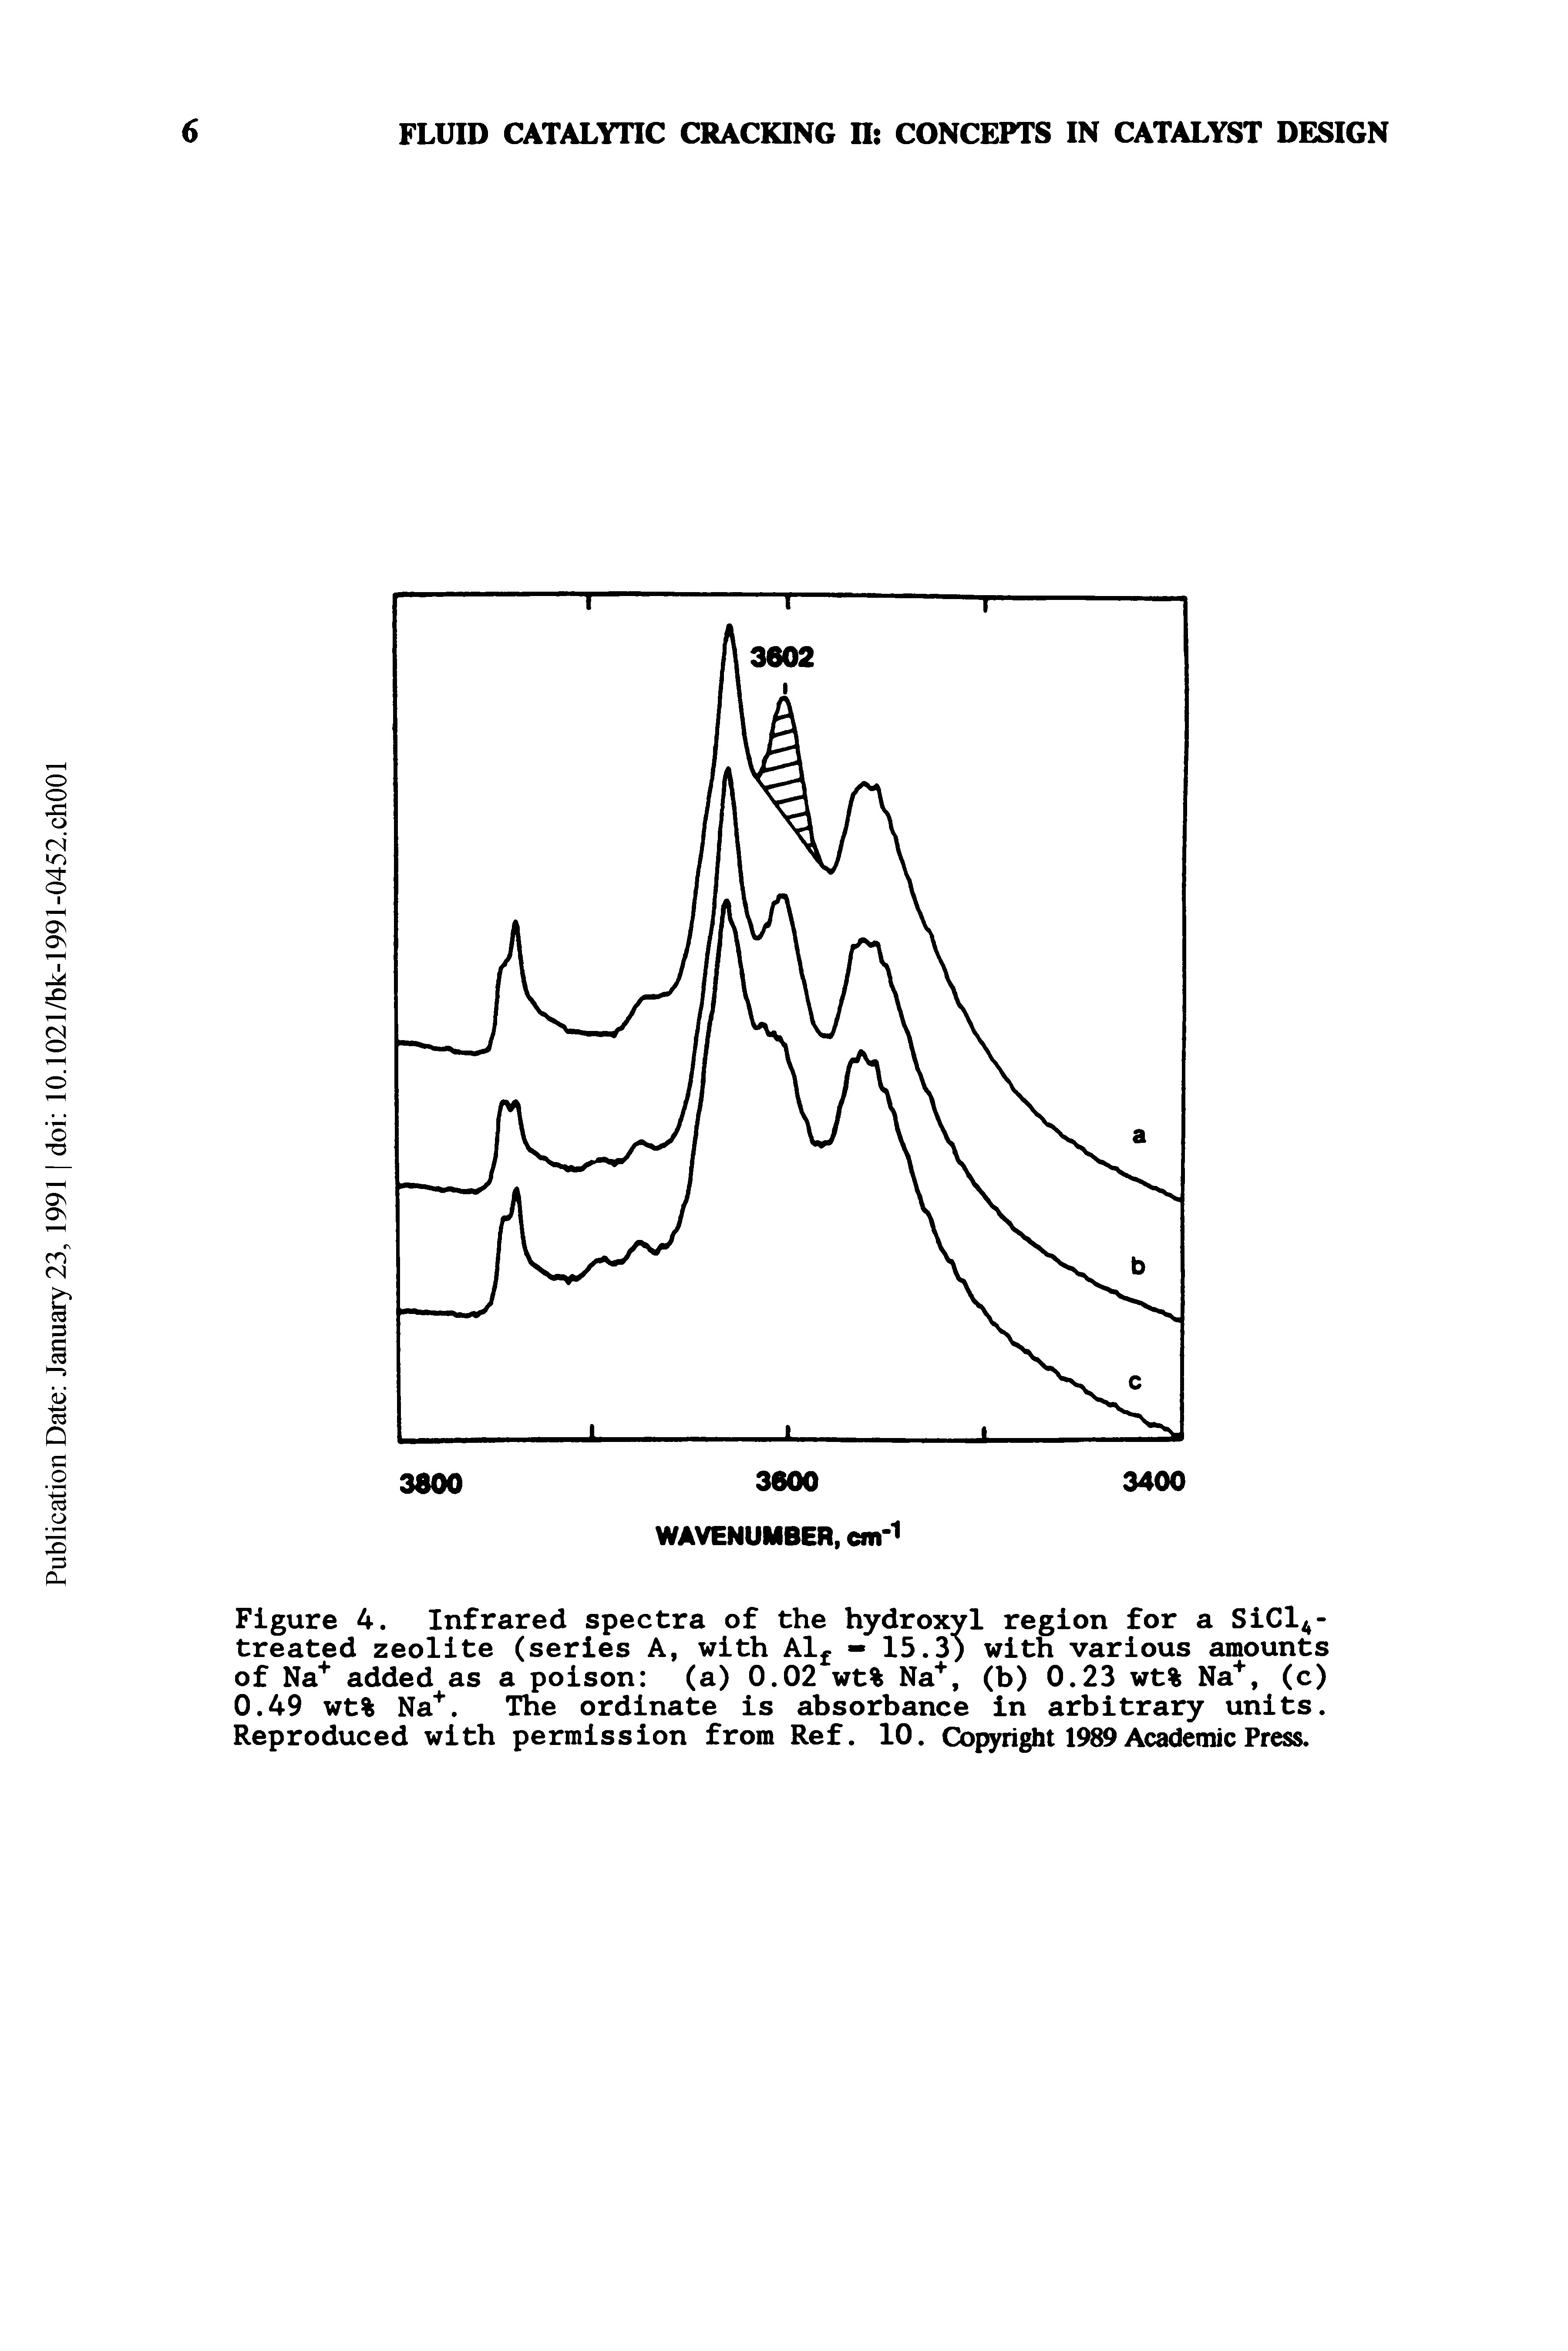 Figure 4. Infrared spectra of the hydroxyl region for a SiClA-treated zeolite (series A, with Alf - 15.3) with various amounts of Na+ added as a poison (a) 0.02 wt% Na+, (b) 0.23 wt% Na+, (c) 0.49 wt% Na+. The ordinate is absorbance in arbitrary units. Reproduced with permission from Ref. 10. Copyright 1989 Academic Press.